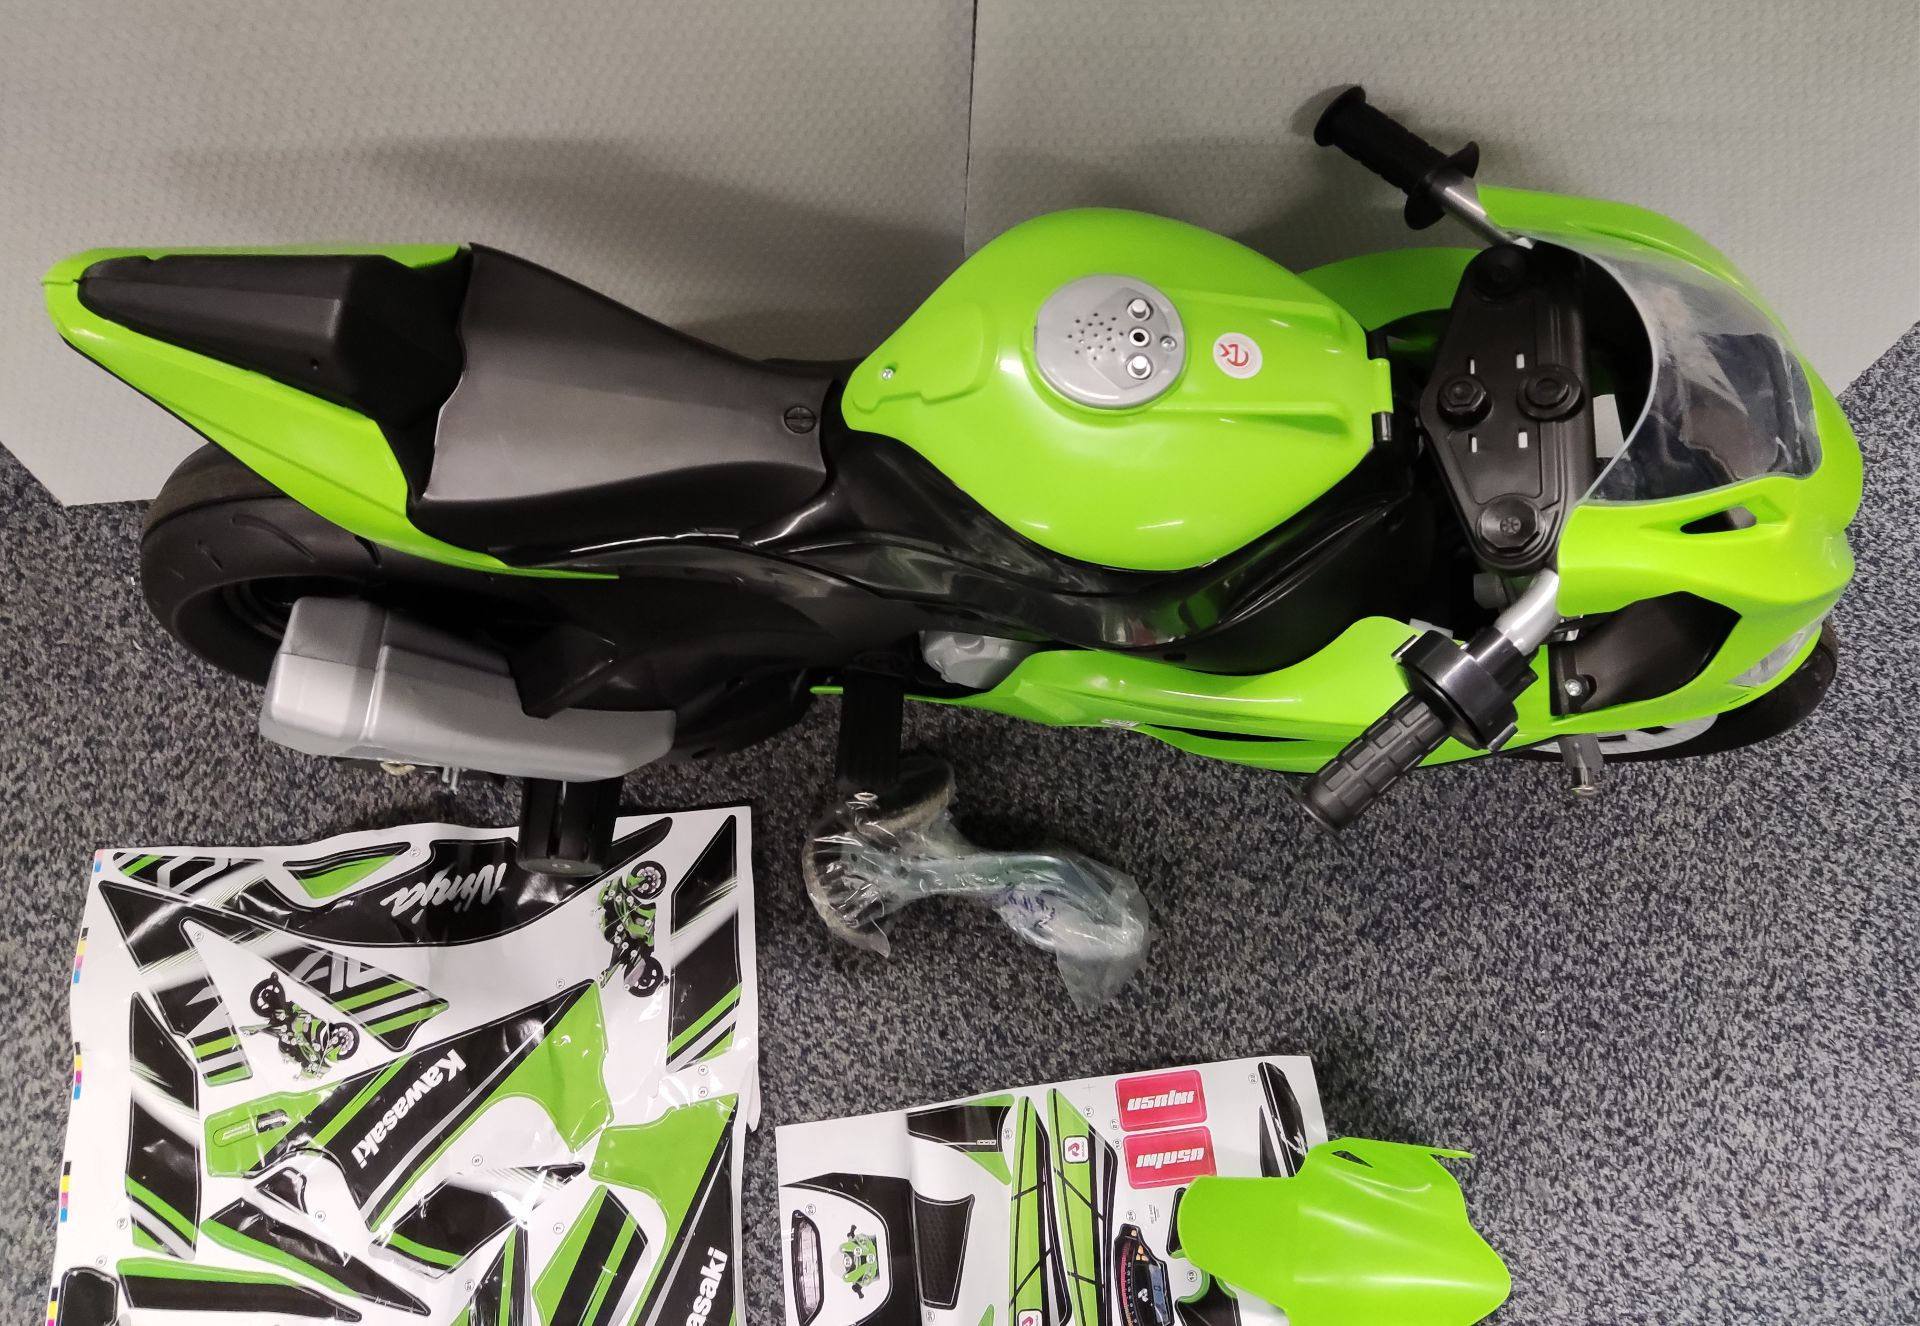 1 x Injusa Kids Electric Ride On Kawasaki ZX10 12V Motorcycle - 6495 - HTYS174 - CL987 - Location: - Image 22 of 24